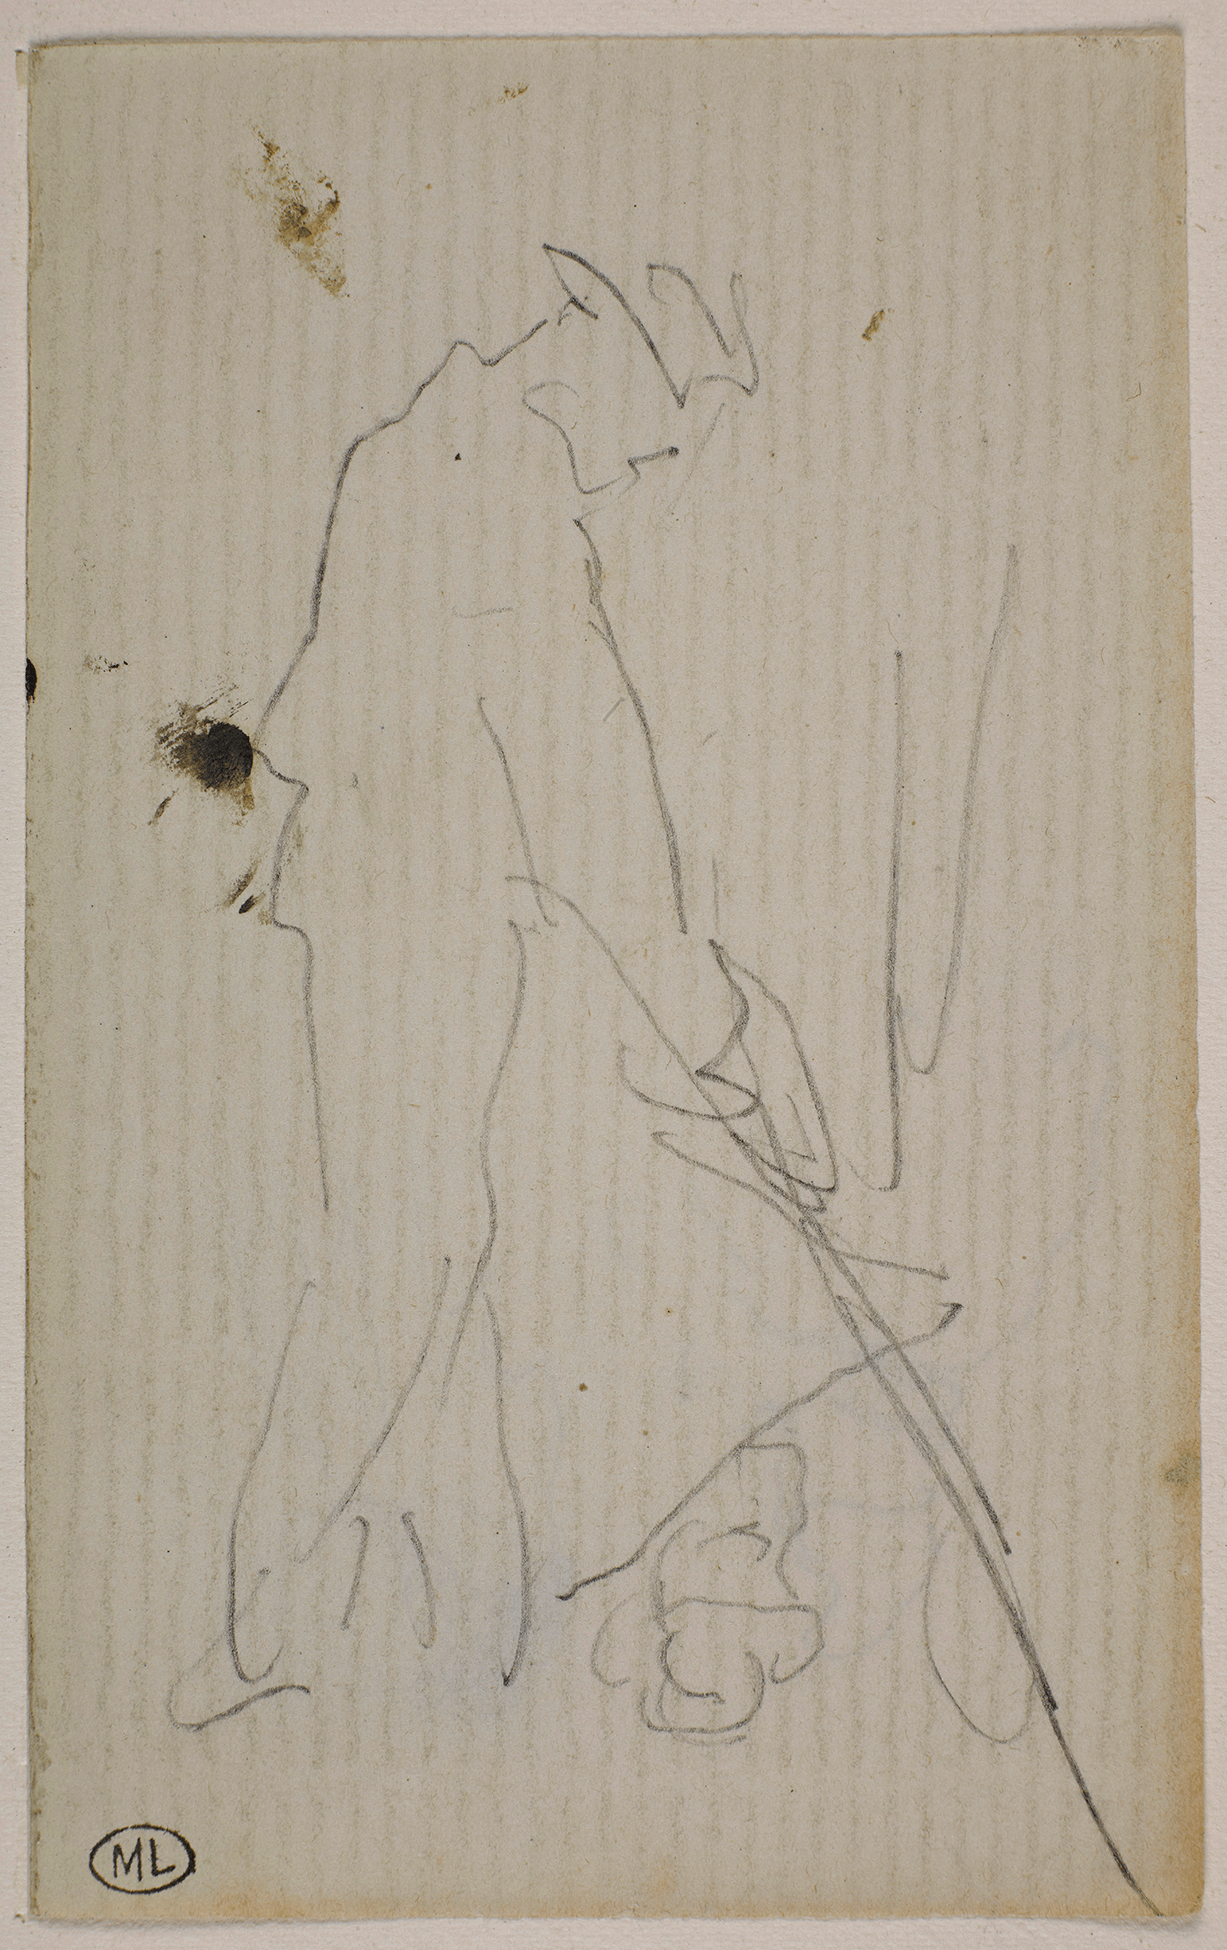 A sketch of an outline of a male figure holding a wooden mallet.